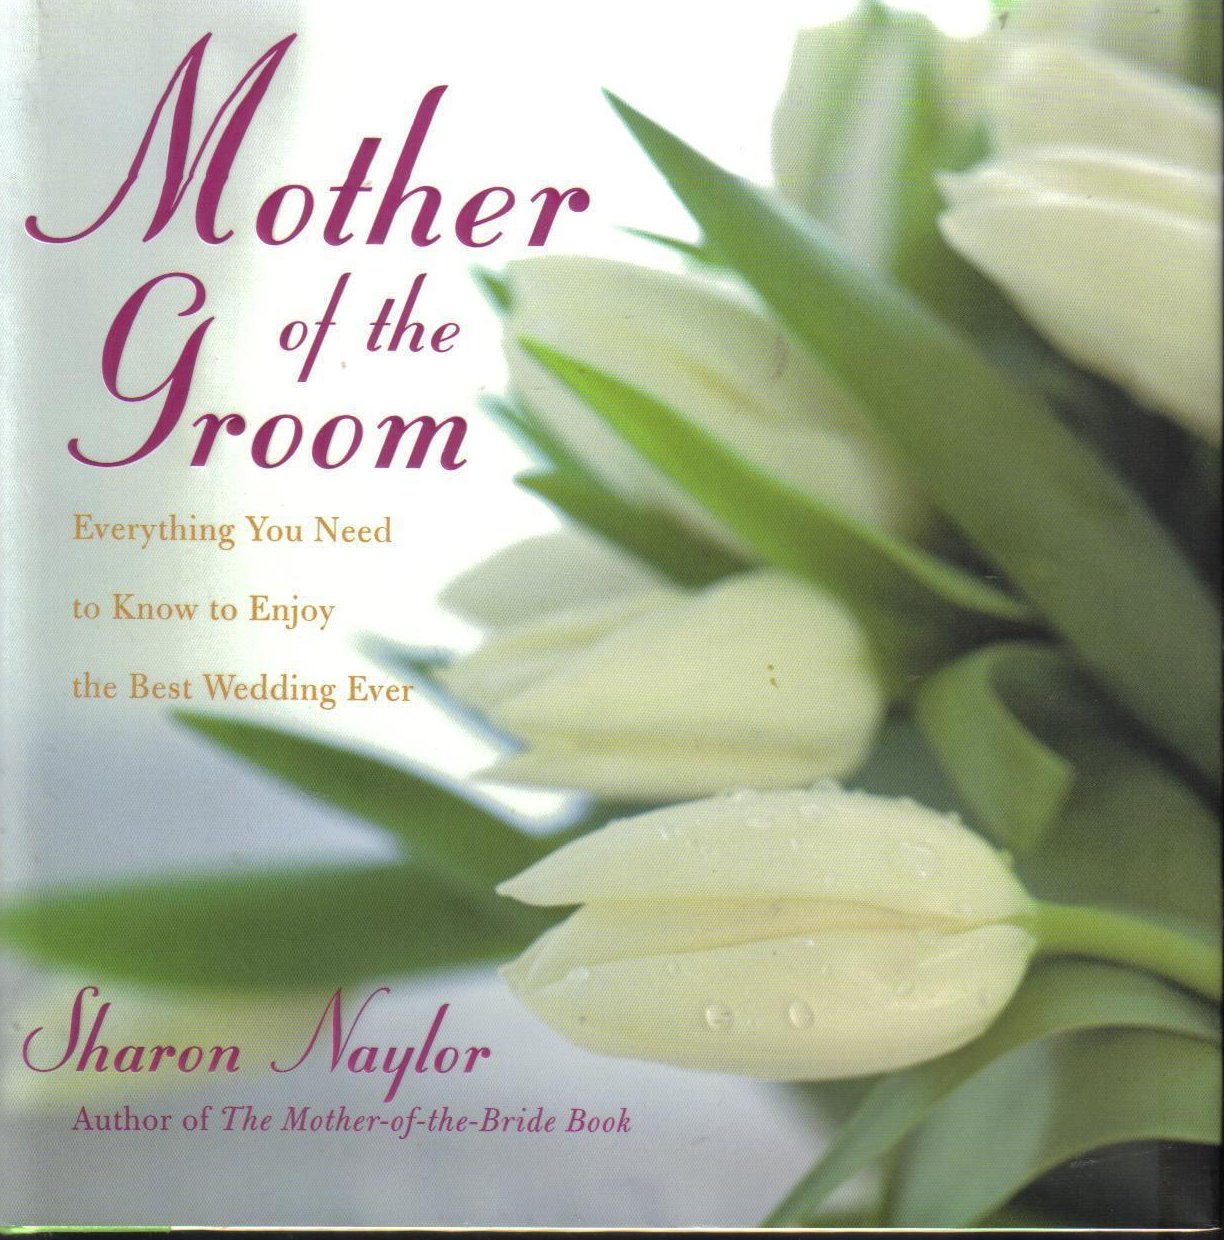 Mother Of The Groom: Everything you Need by Sharon Naylor